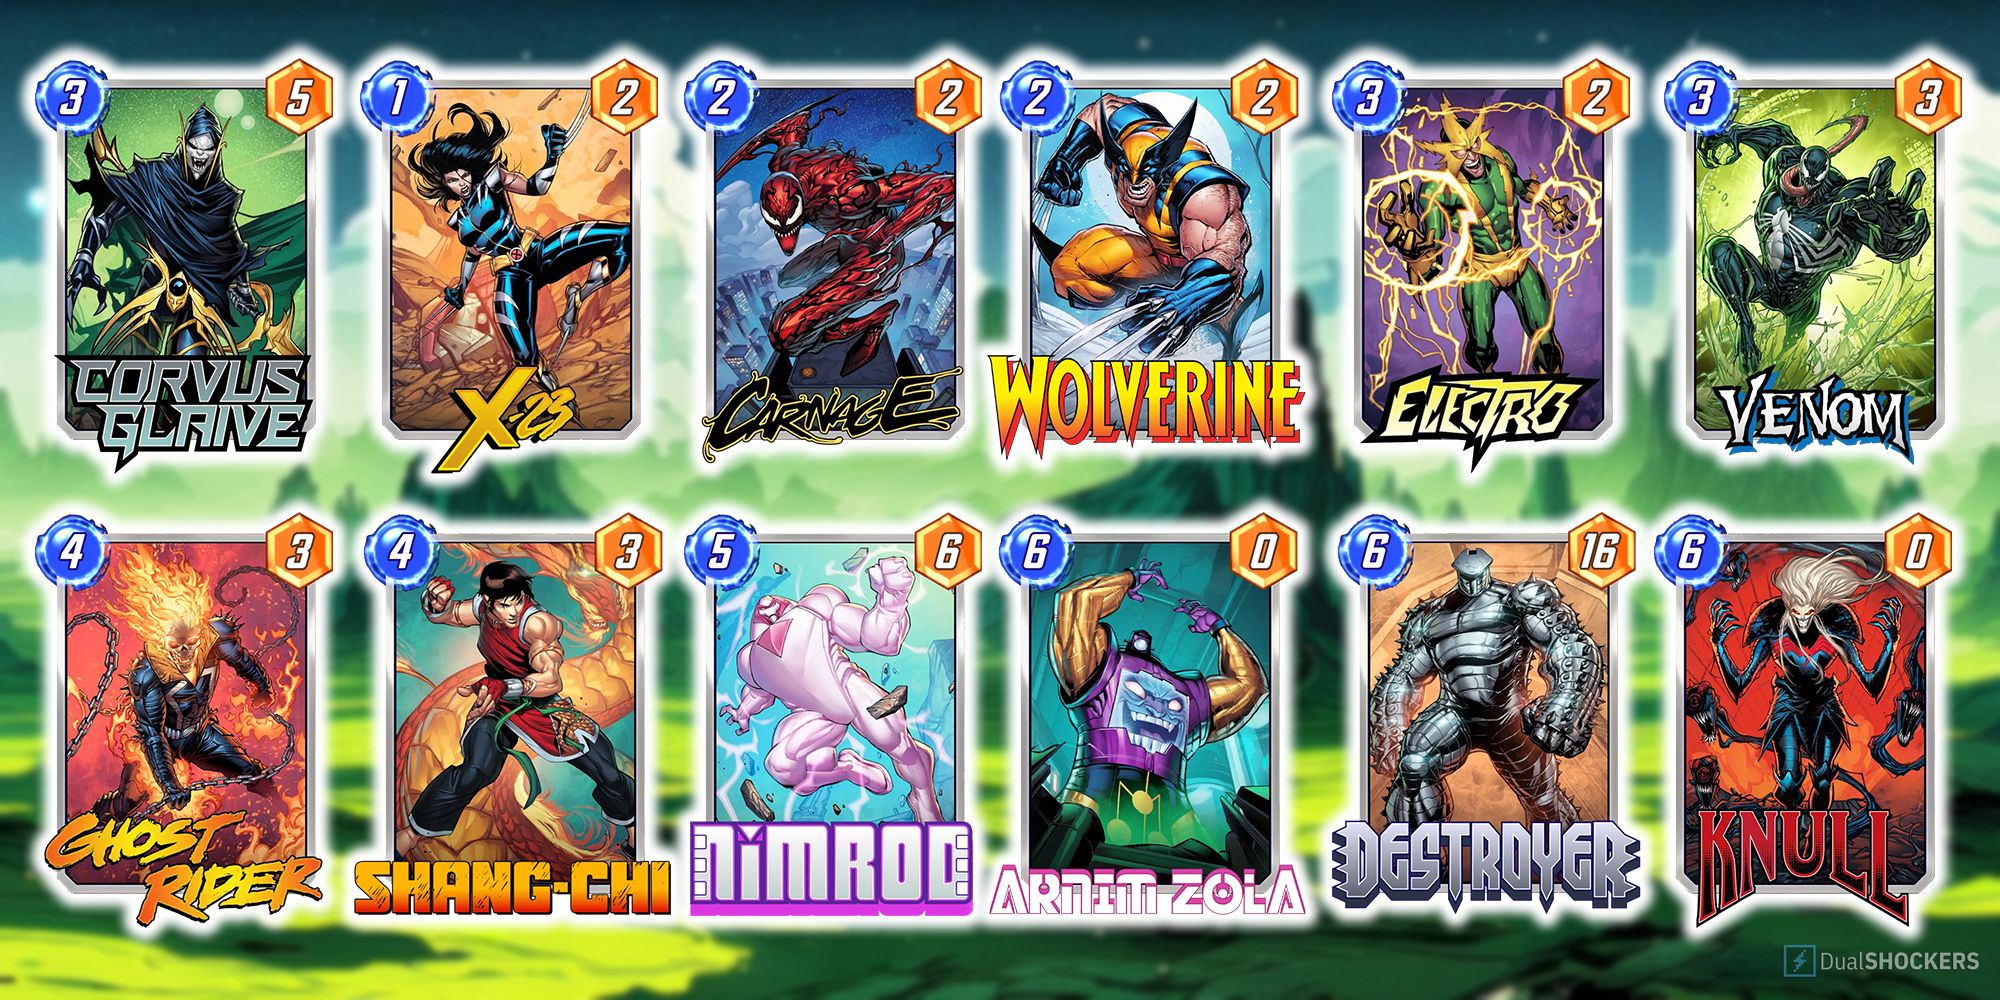 Marvel Snap deck comprised of Corvus Glaive, X-23, Carnage, Wolverine, Electro, Venom, Ghost Rider, Shang-Chi, Nimrod, Arnim Zola, Destroyer, and Knull.